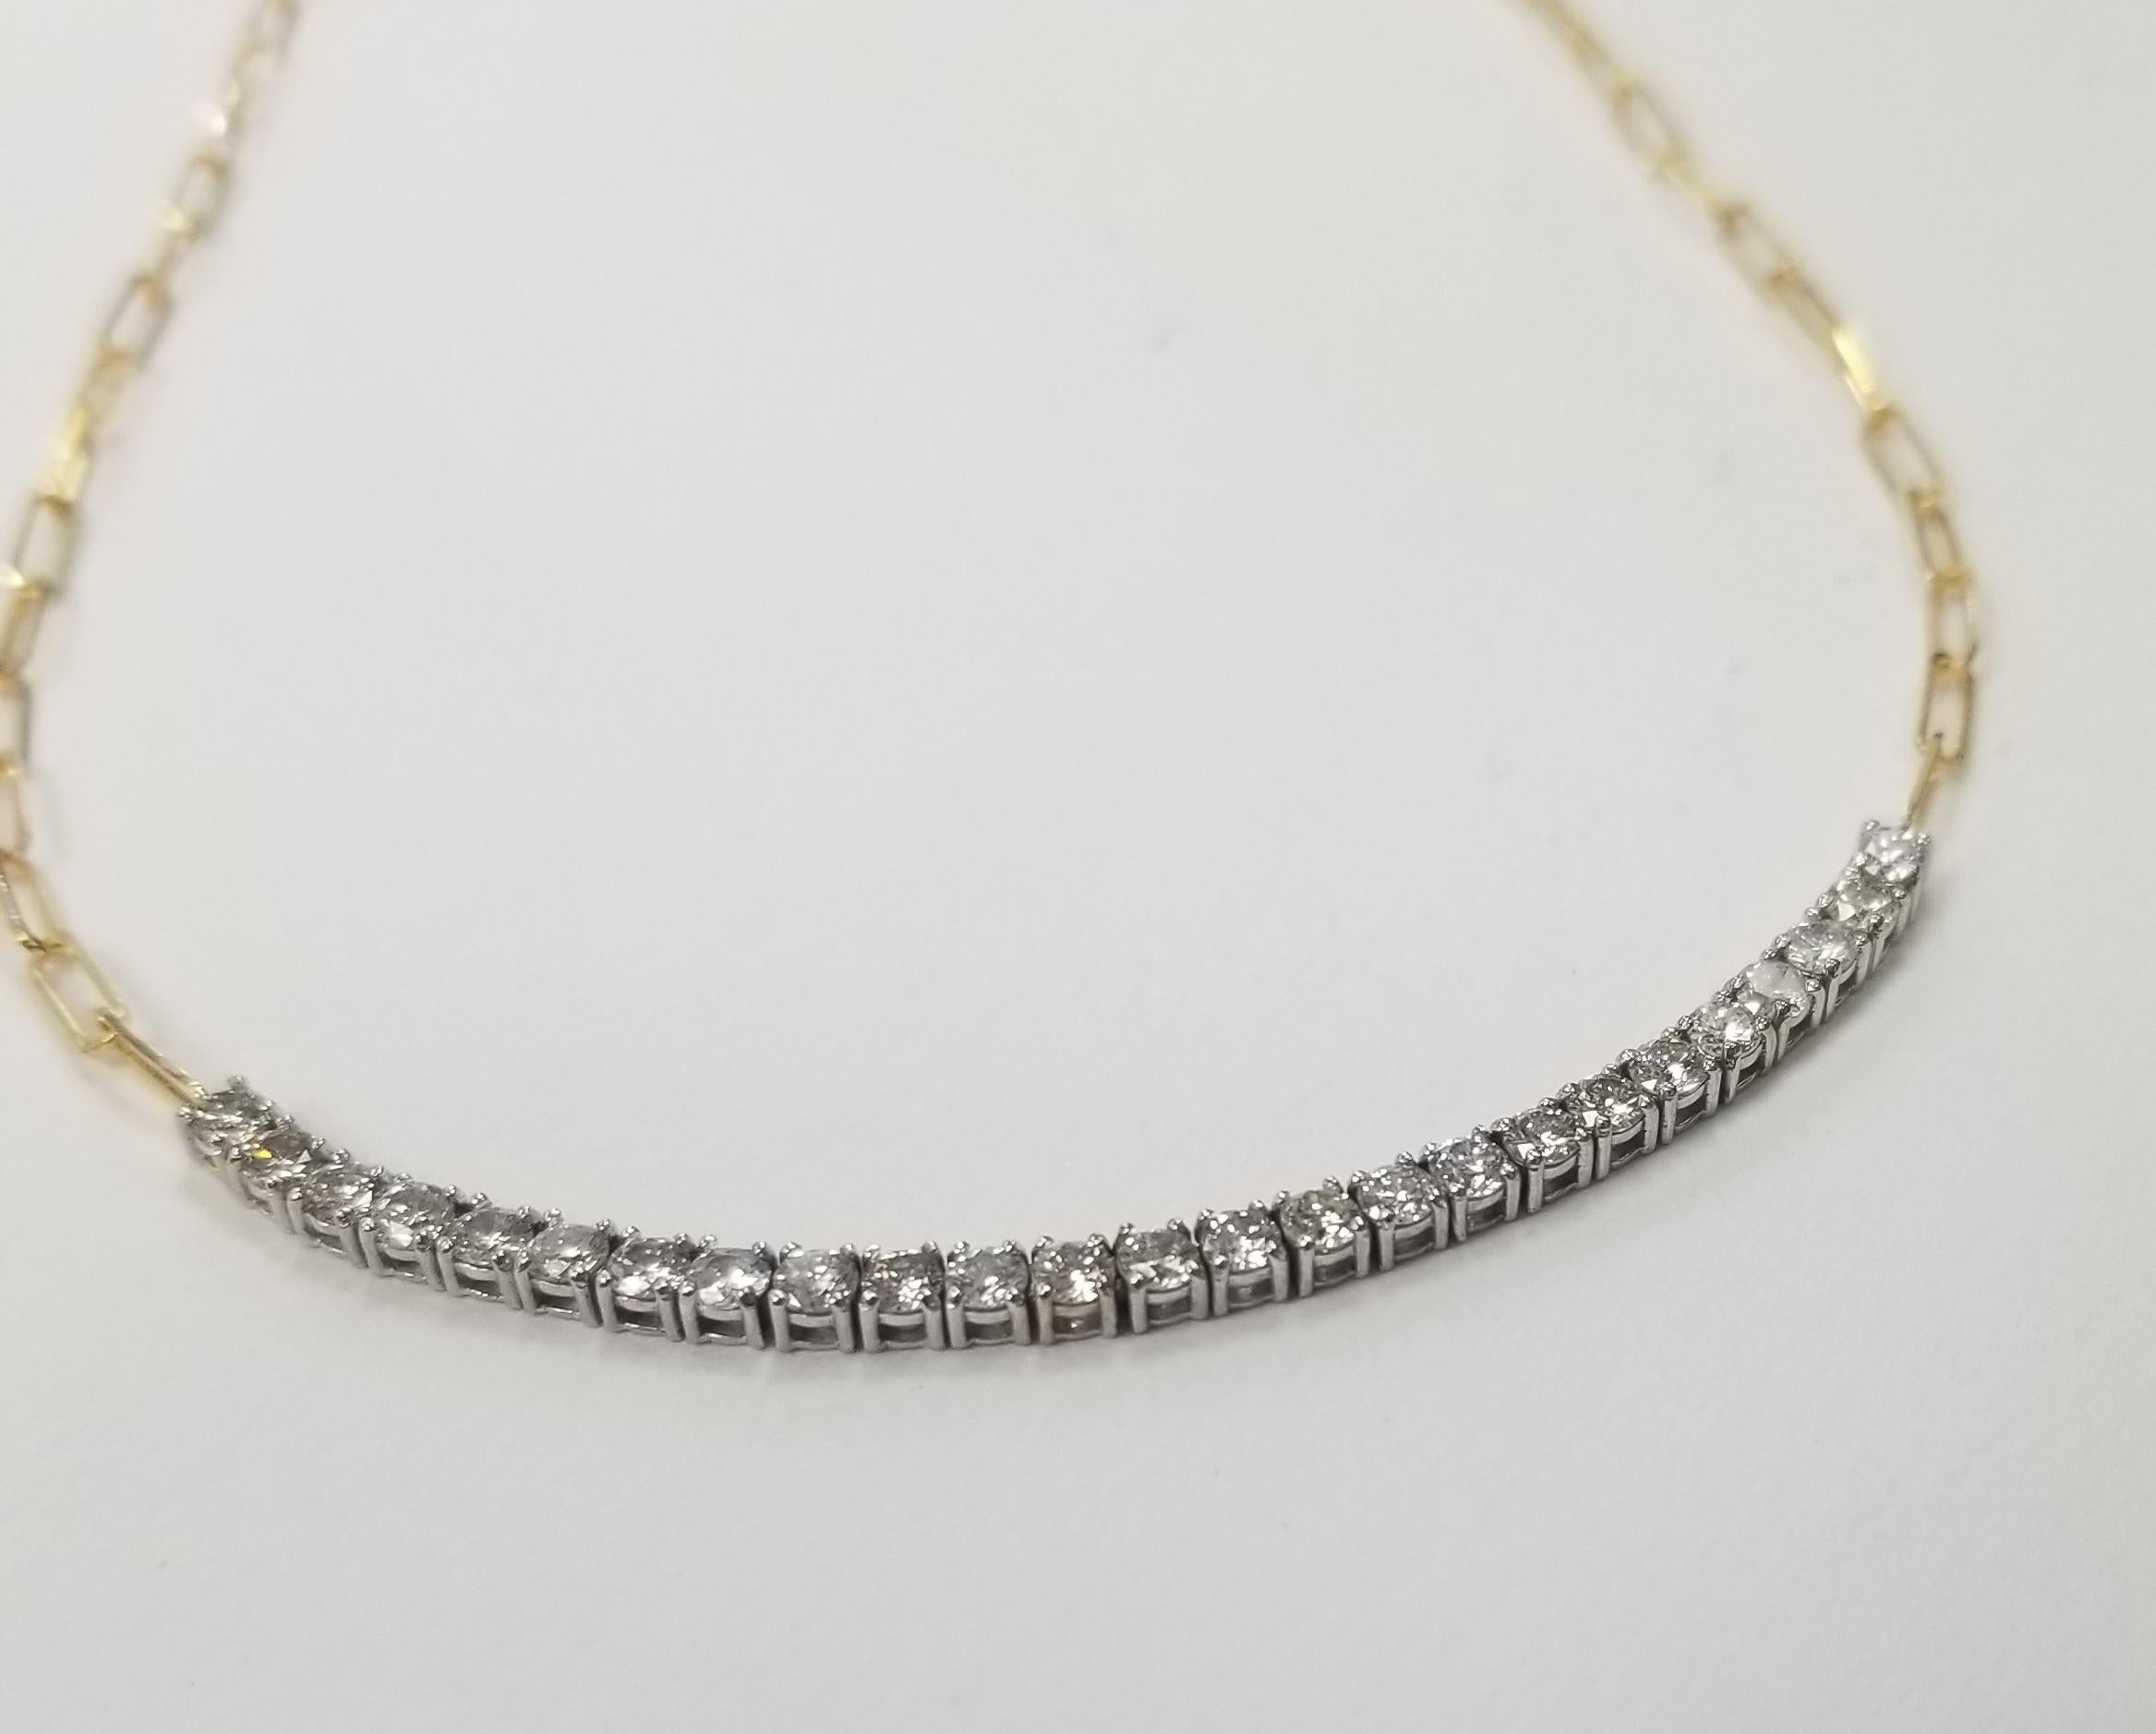 Specifications:
    main stone:ROUND DIAMONDS
    diamonds: 25 PC
    carat total weight: 1.50 CT
    color: G
    clarity:VS2-SI1
    brand:CUSTOM MADE
    metal:14K YELLOW gold
    type: Necklace
    weight: 4.8 gr
    LENGTH:18 INCH 
   